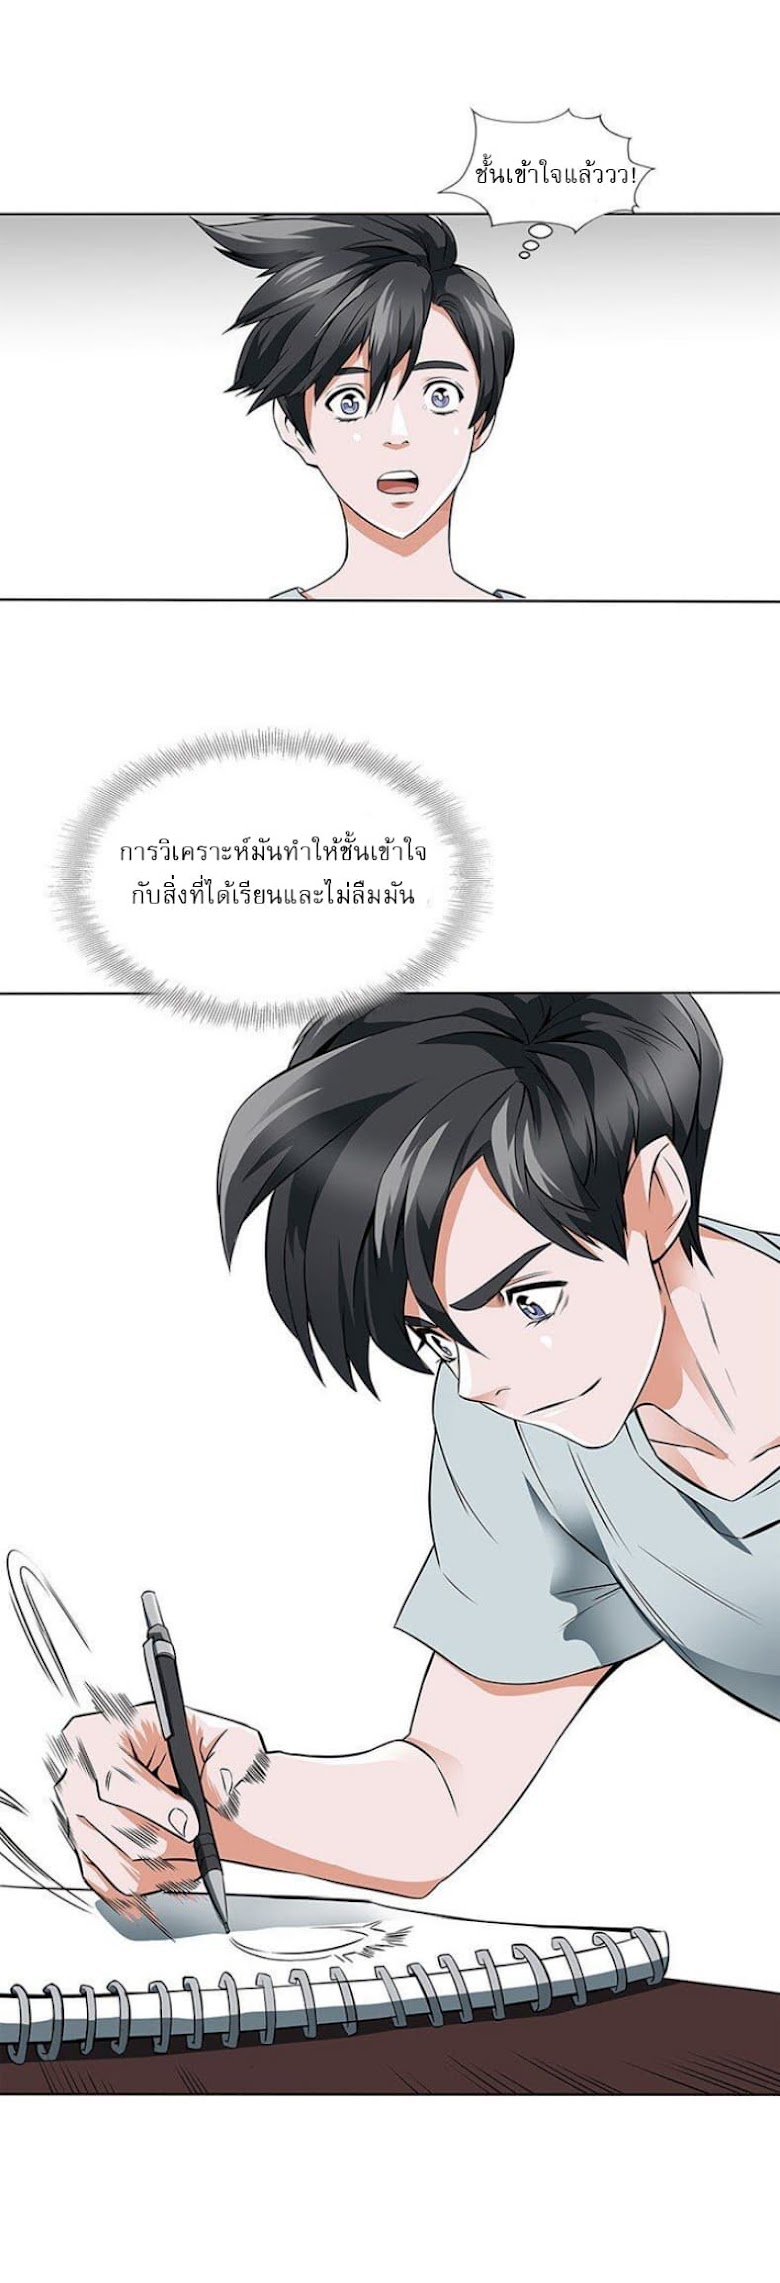 I Stack Experience Through Reading Books - หน้า 8